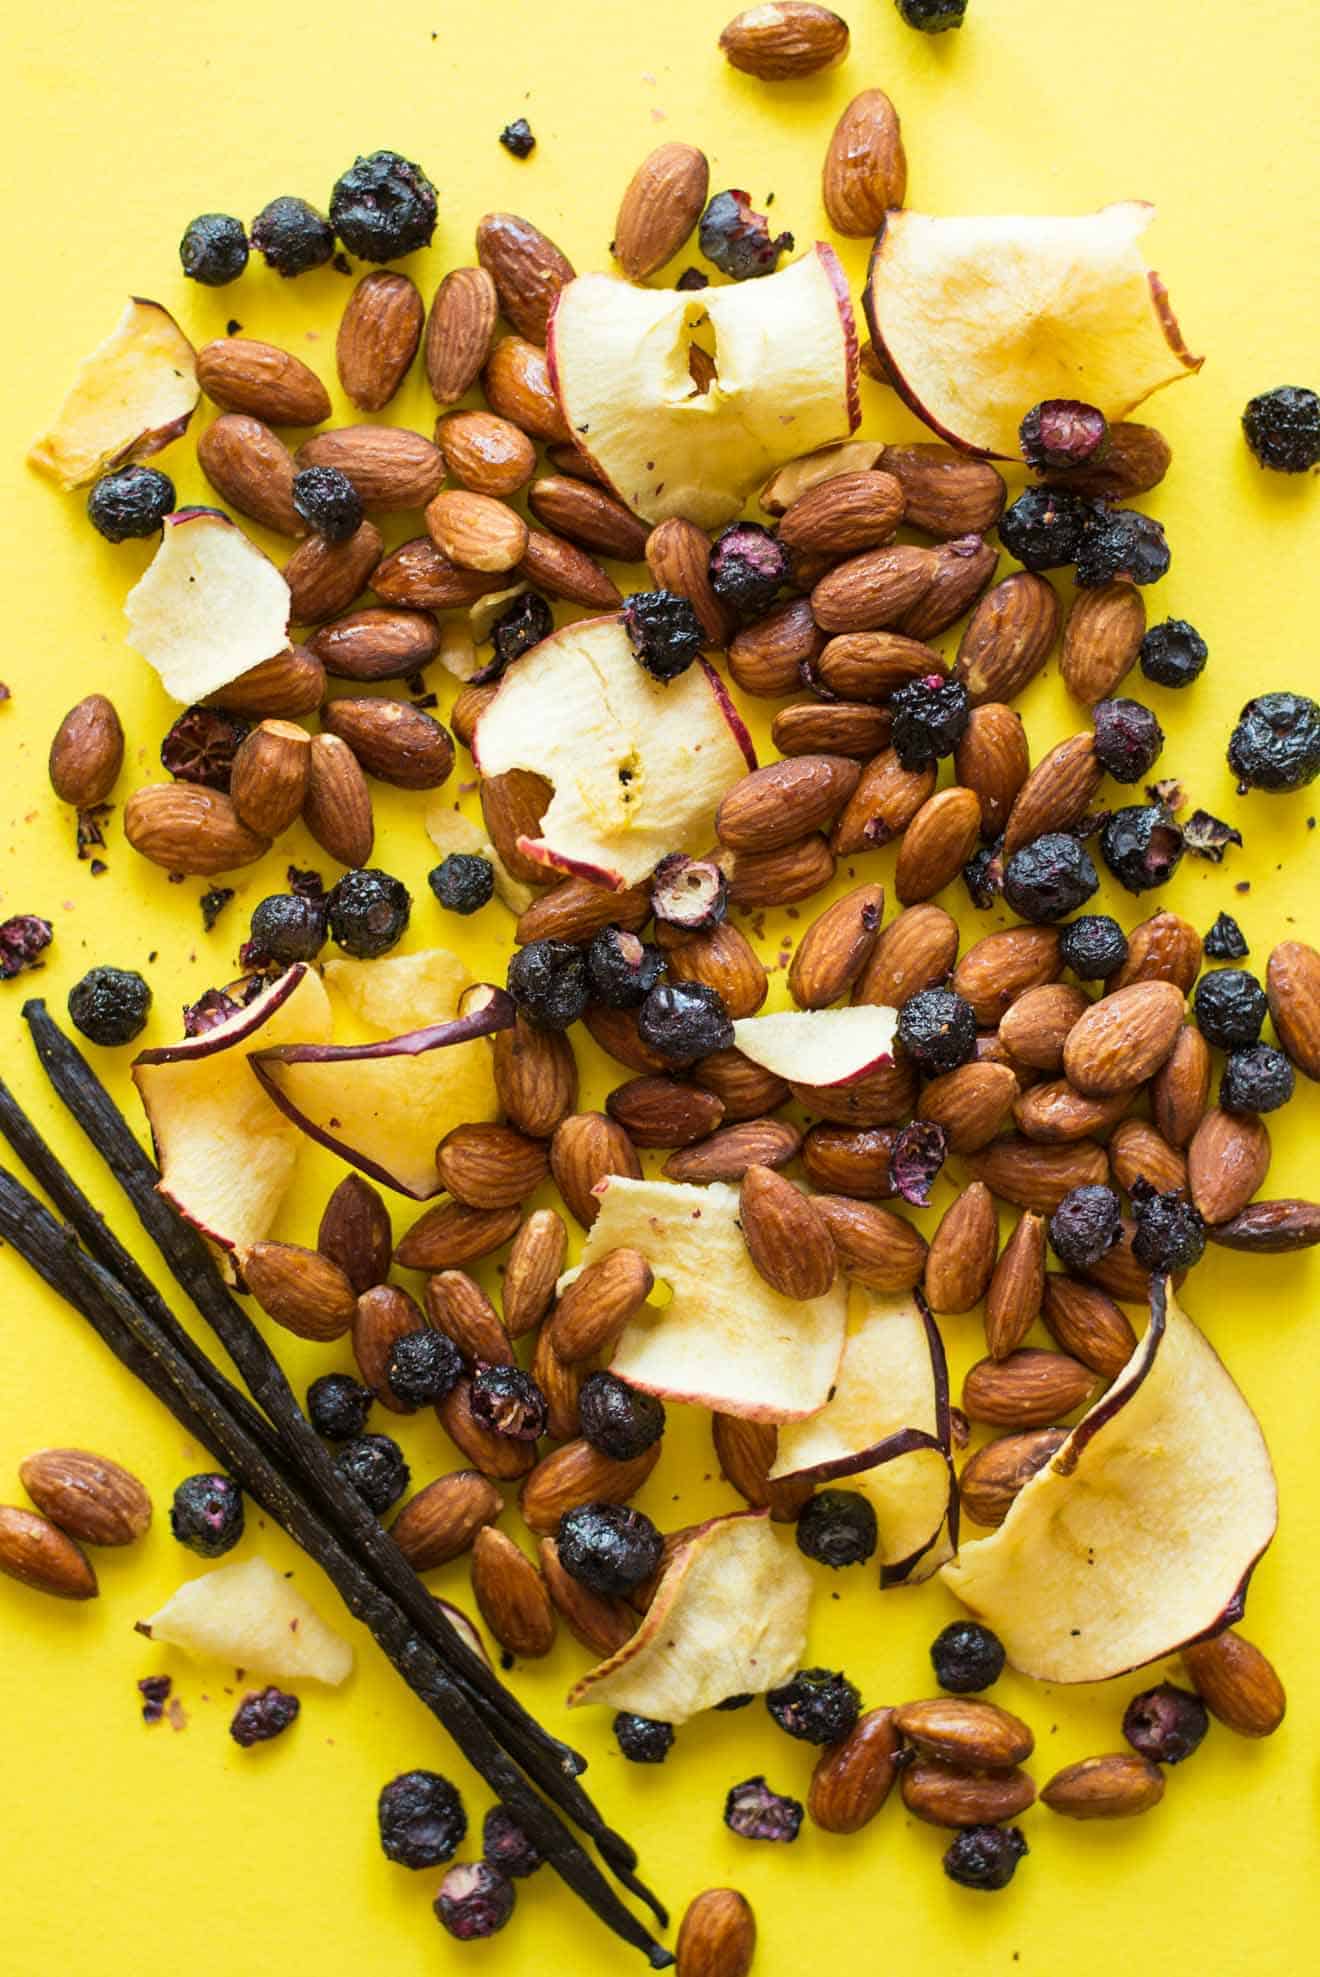 Dried apple slices, almonds, raisins and blueberries are spread on a bright yellow surface with a vanilla bean.